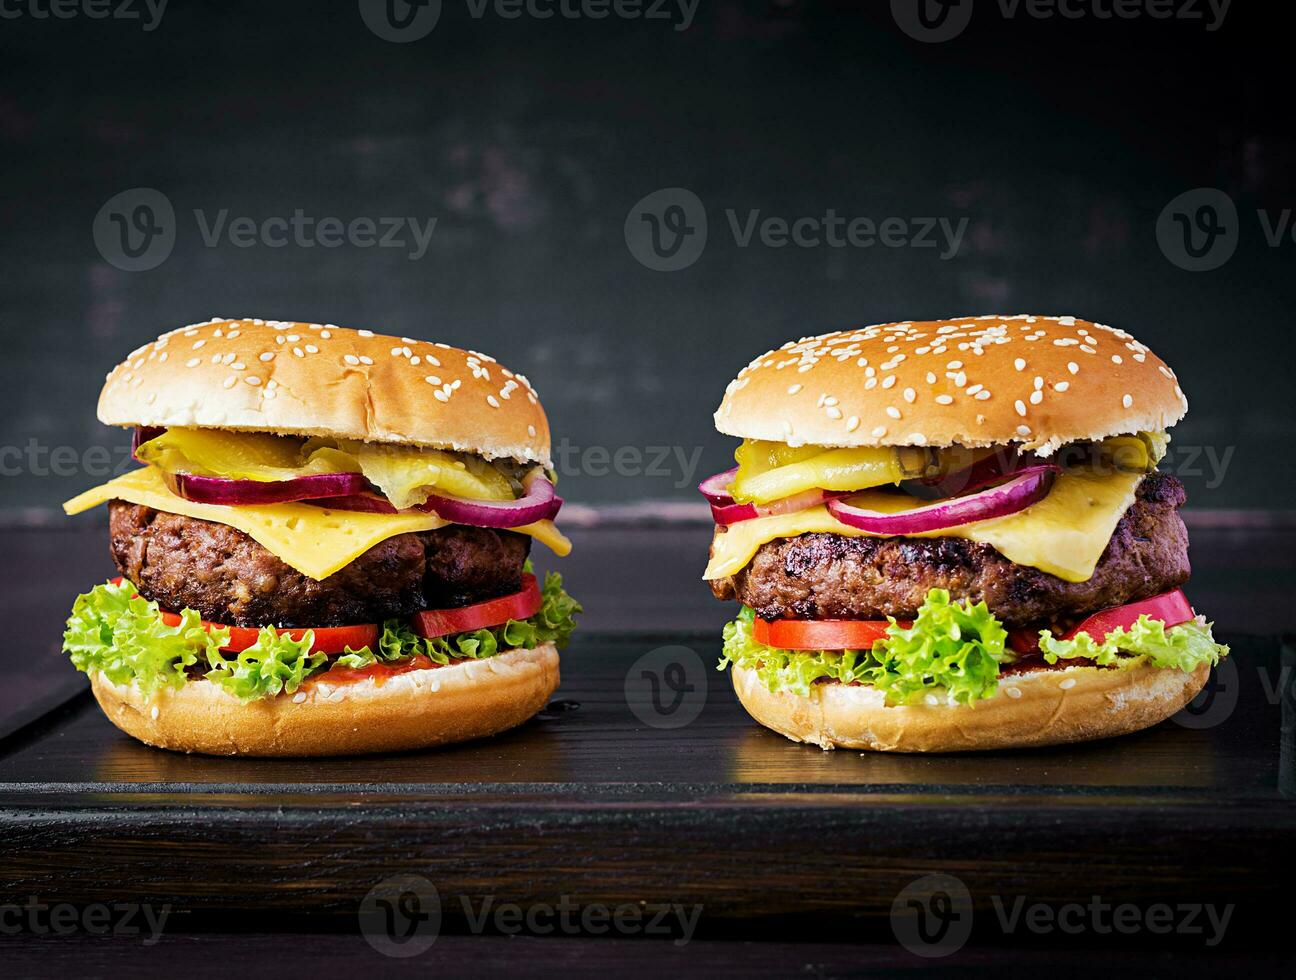 Big sandwich - hamburger burger with beef,  tomato, cheese, pickled cucumber and red onion. photo